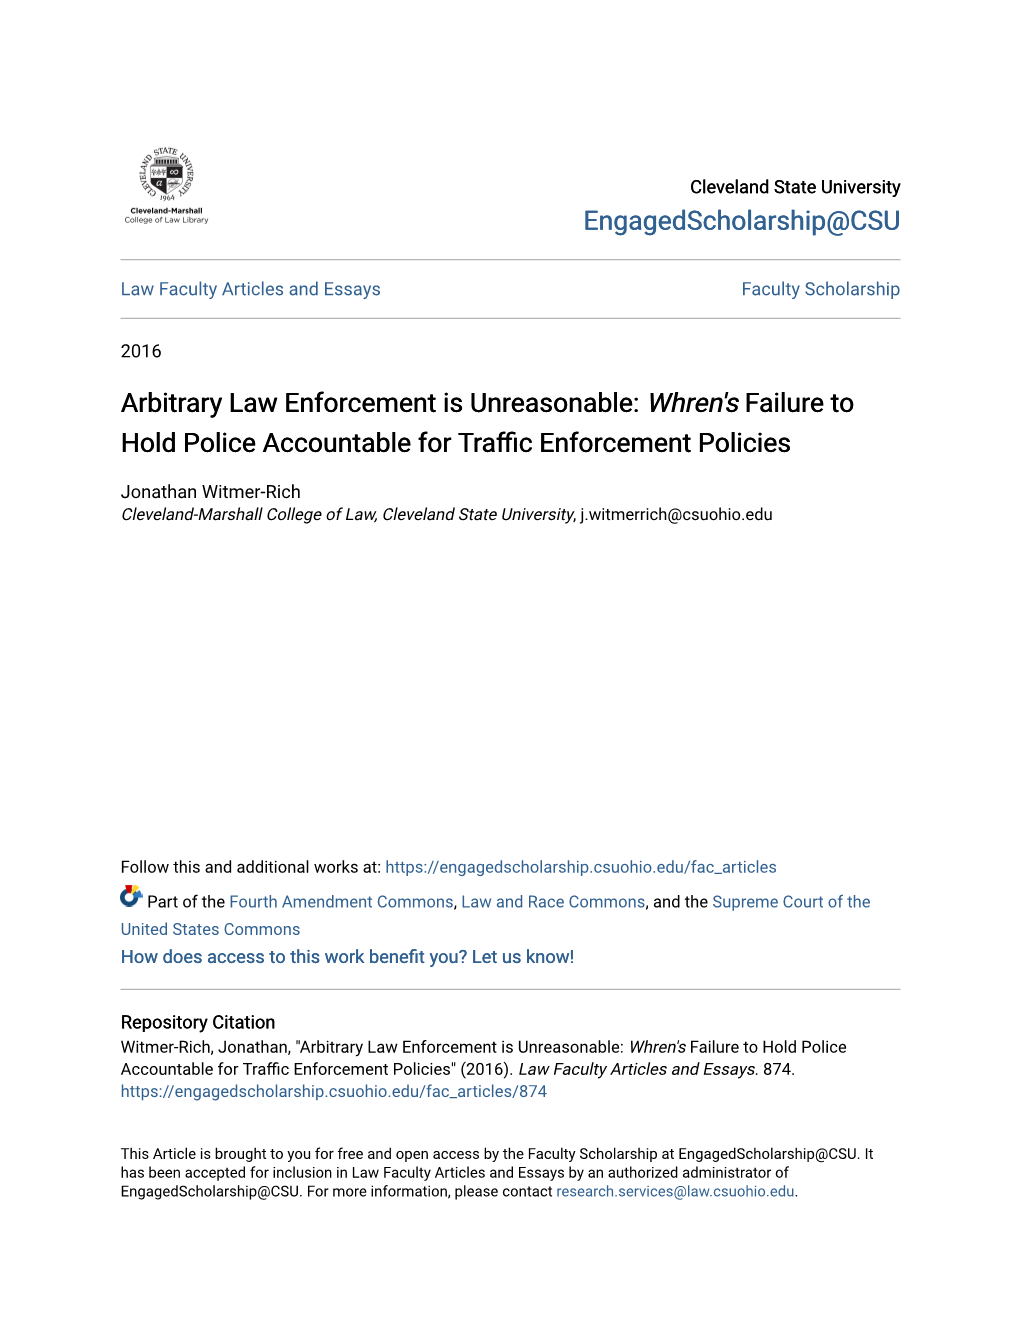 &lt;I&gt;Whren's&lt;/I&gt; Failure to Hold Police Accountable for Traffic Enforce